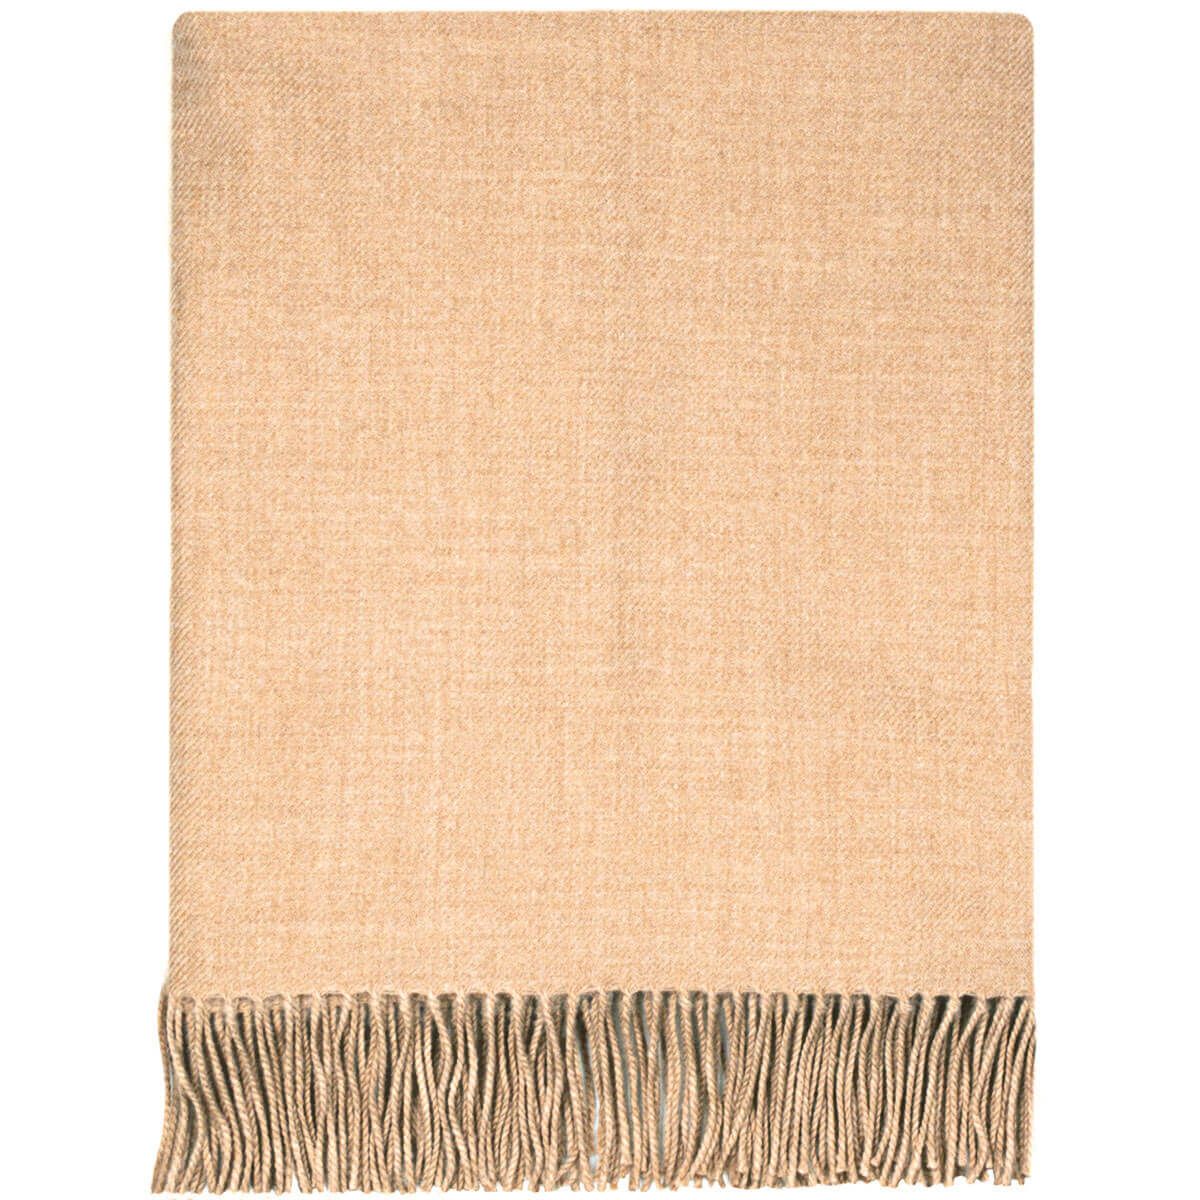 Malt Lambswool Blanket - Click Image to Close